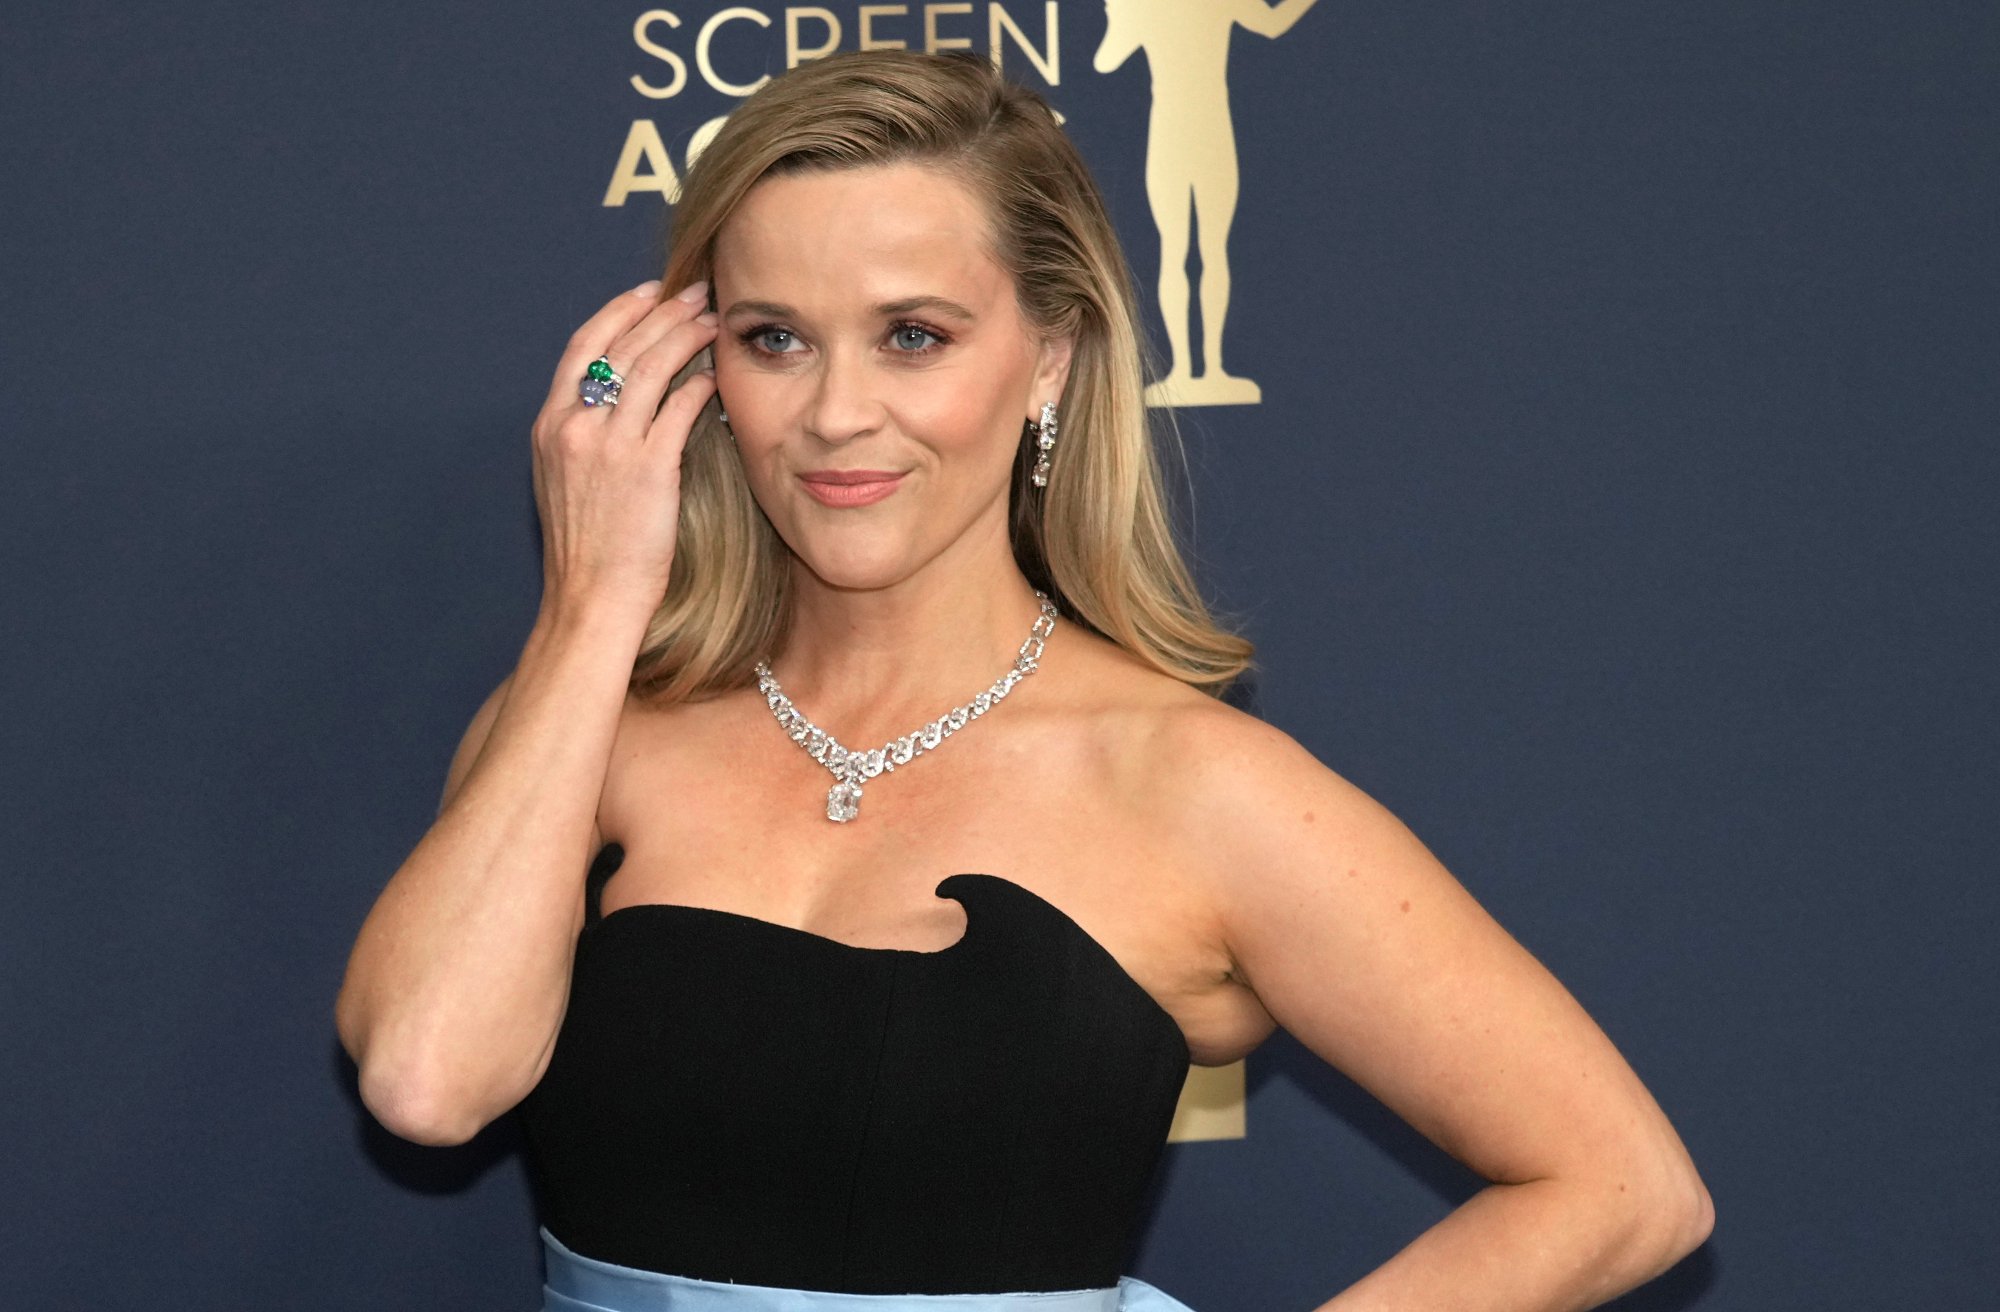 Reese Witherspoon Reveals How ‘Top Gun: Maverick’ Inspired ‘Legally Blonde 3’